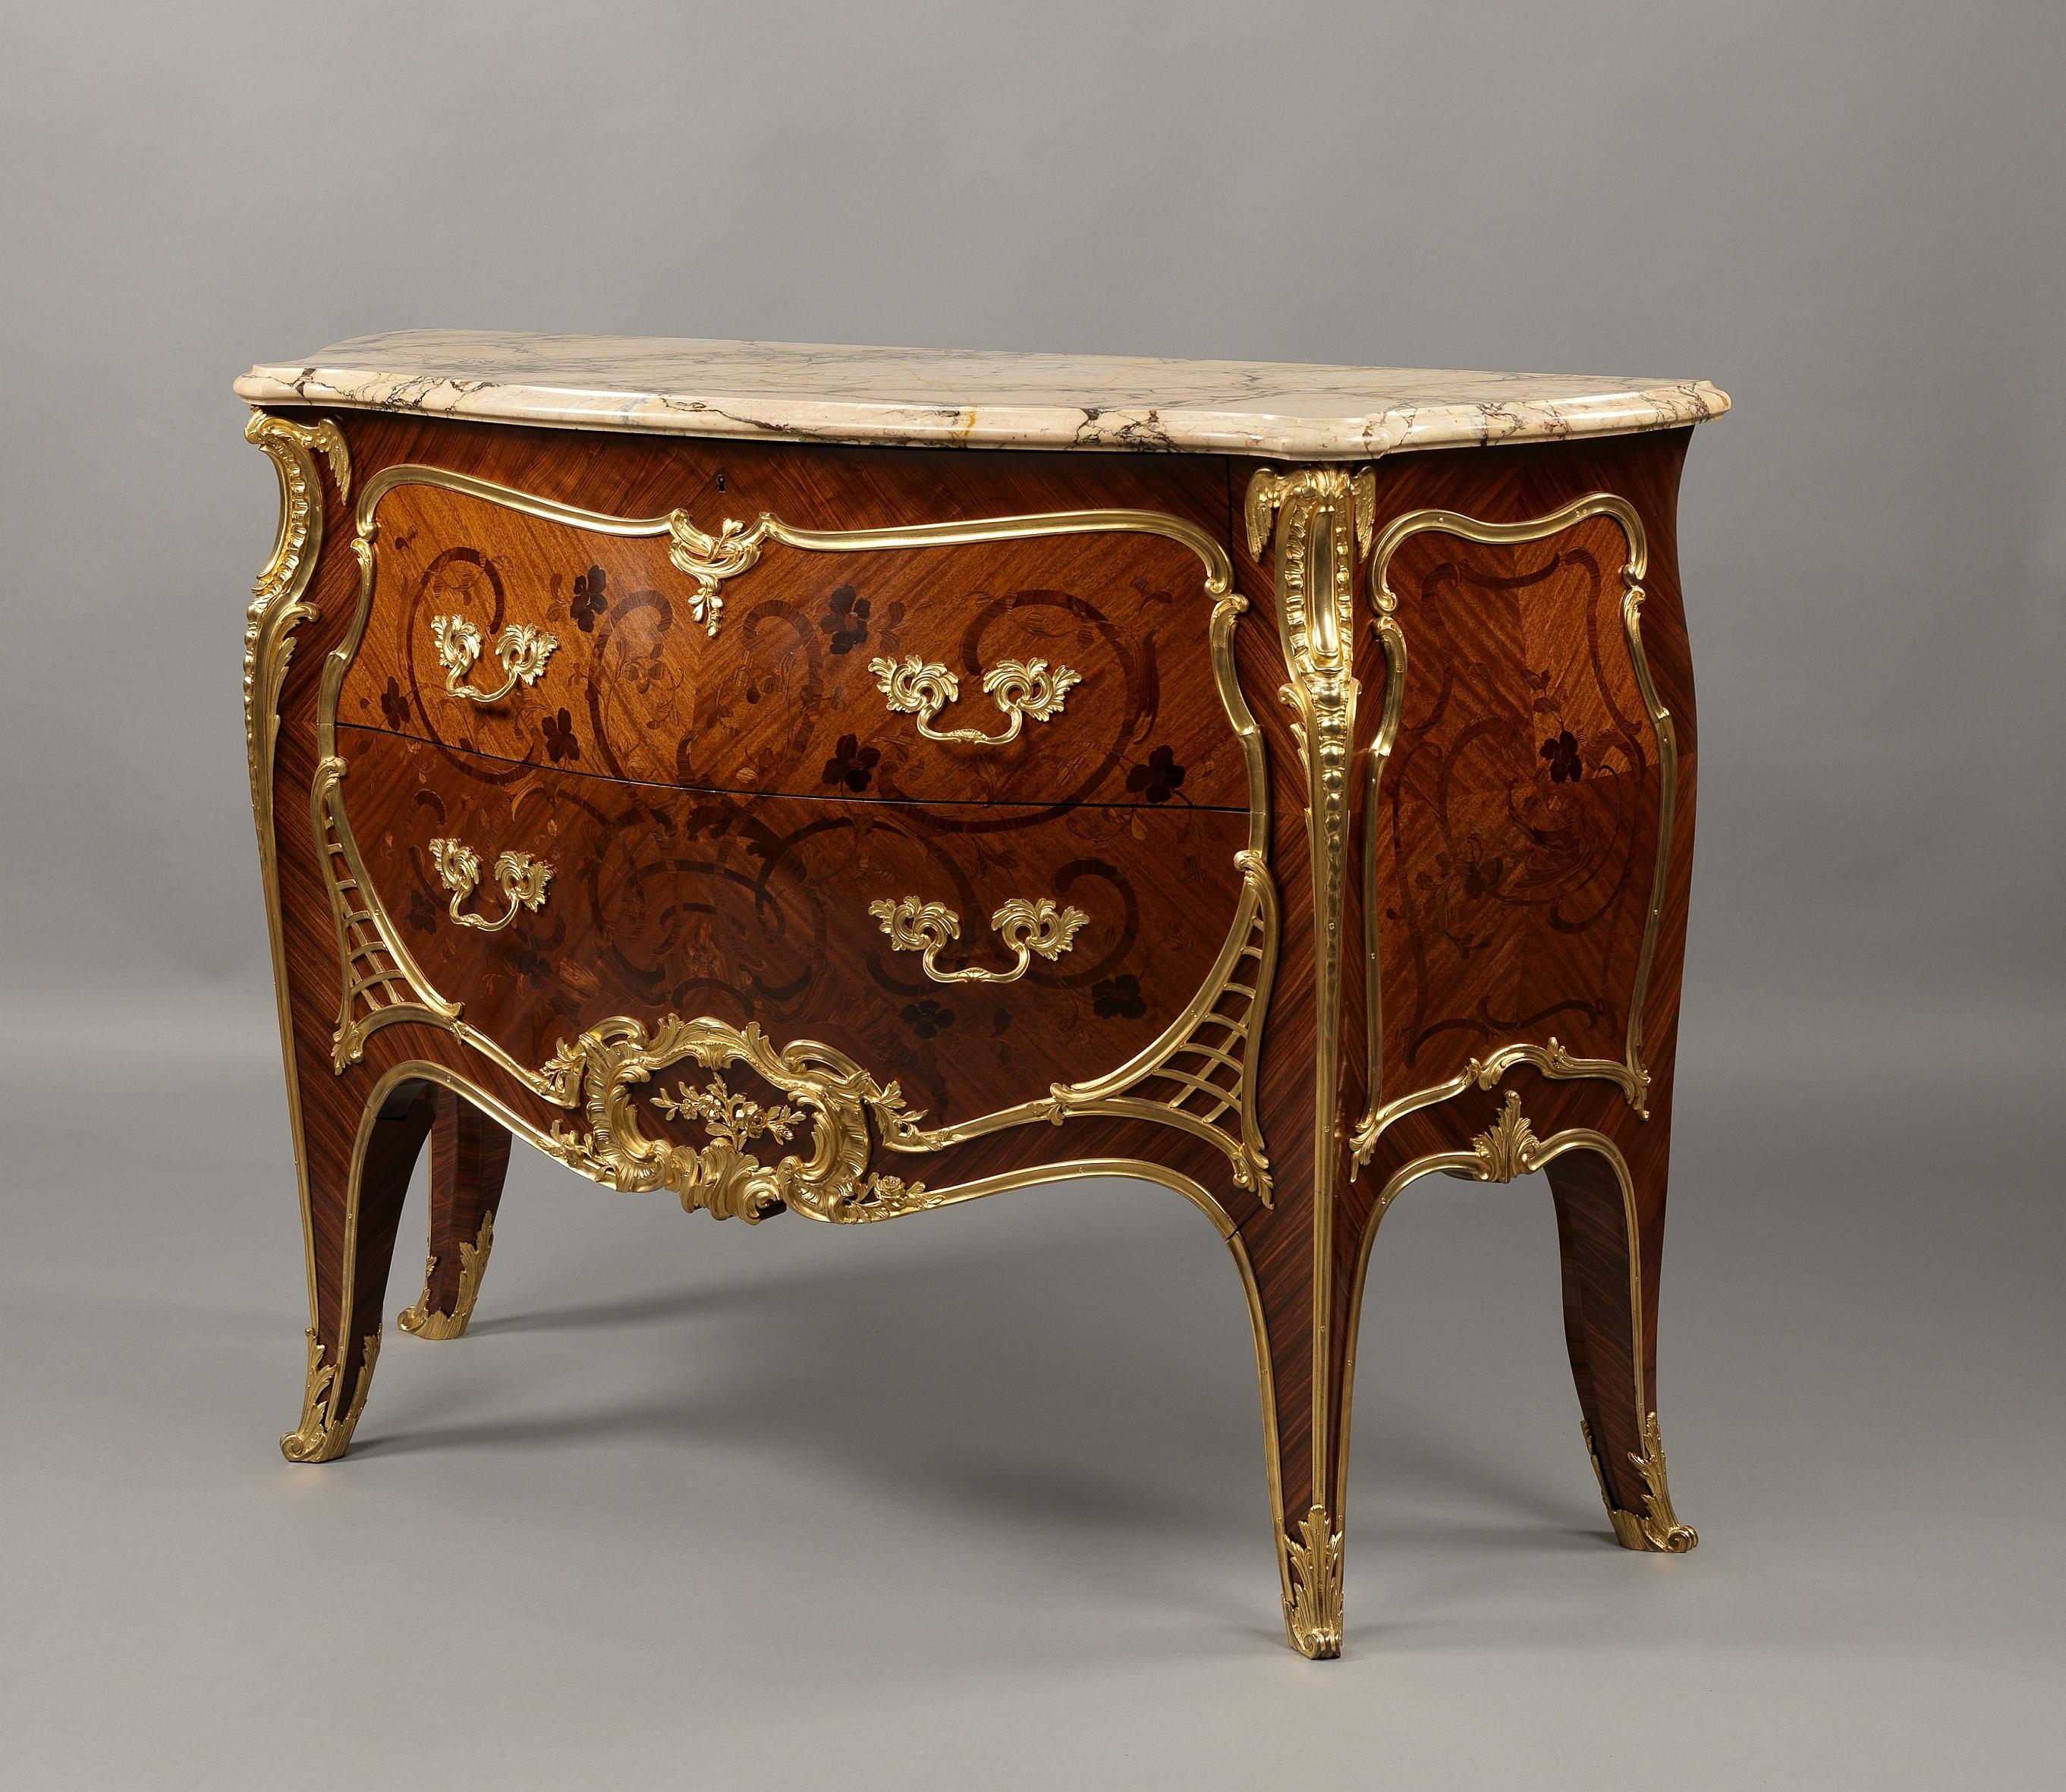 A Louis XV style gilt bronze mounted marquetry commode with marble top, possibly by François Linke.

French, circa 1900.

Stamped 'Mon LEGER' to the back of the commode for the retailer Émile Léger et Cie. 

This unusual marquetry and gilt